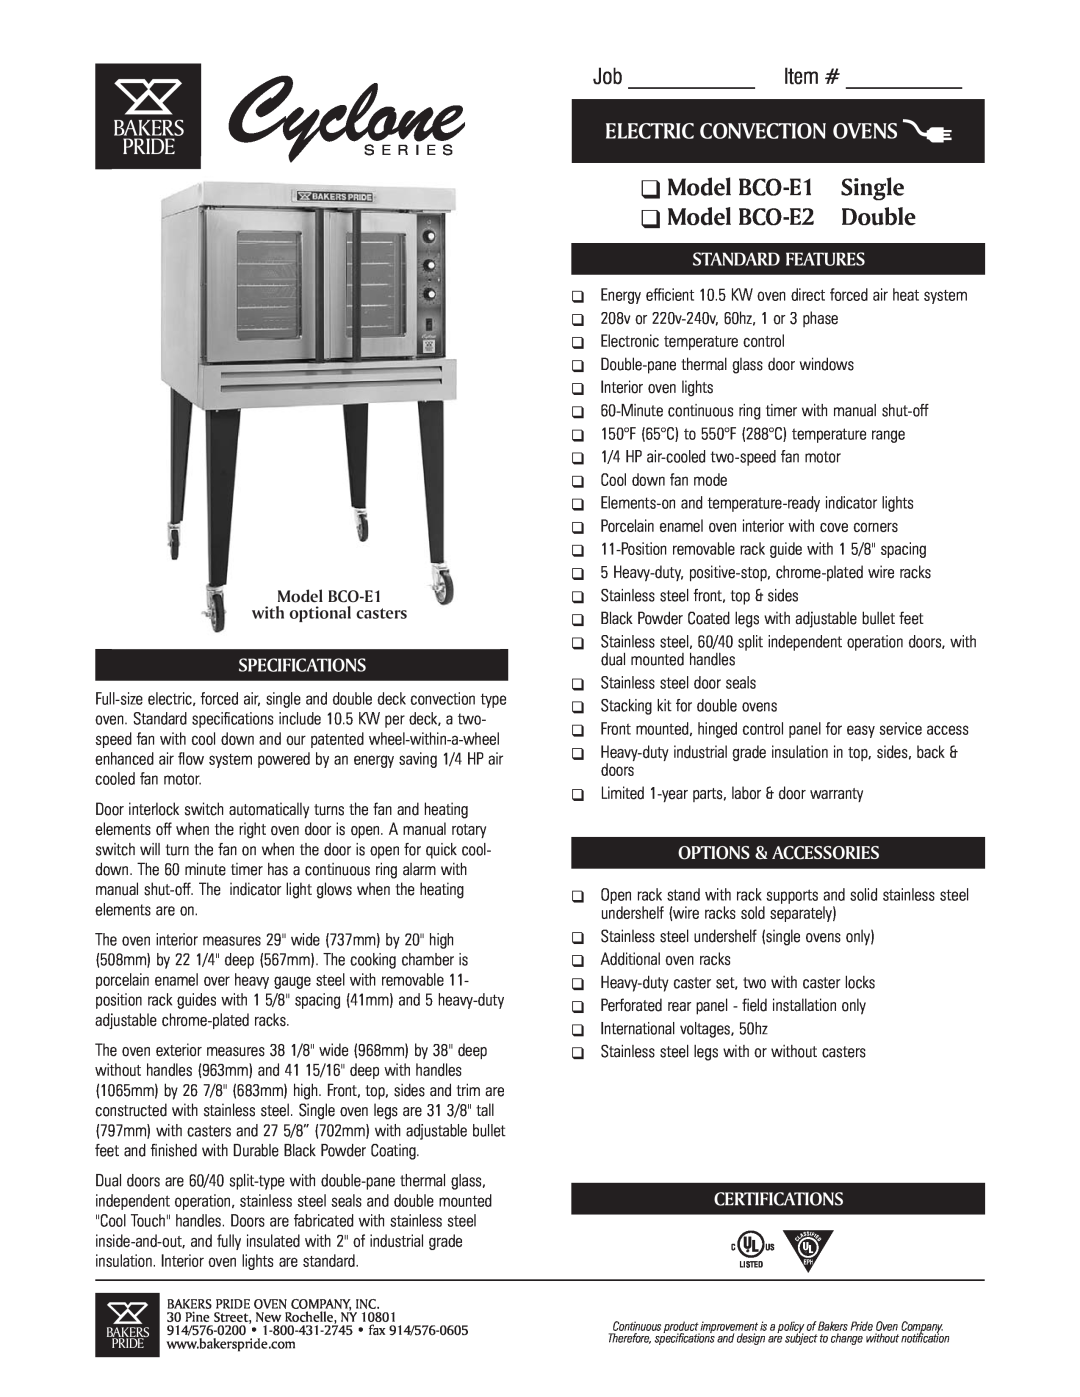 Bakers Pride Oven specifications Model BCO-E1 with optional casters, Model BCO-E1Single Model BCO-E2Double, Job Item # 